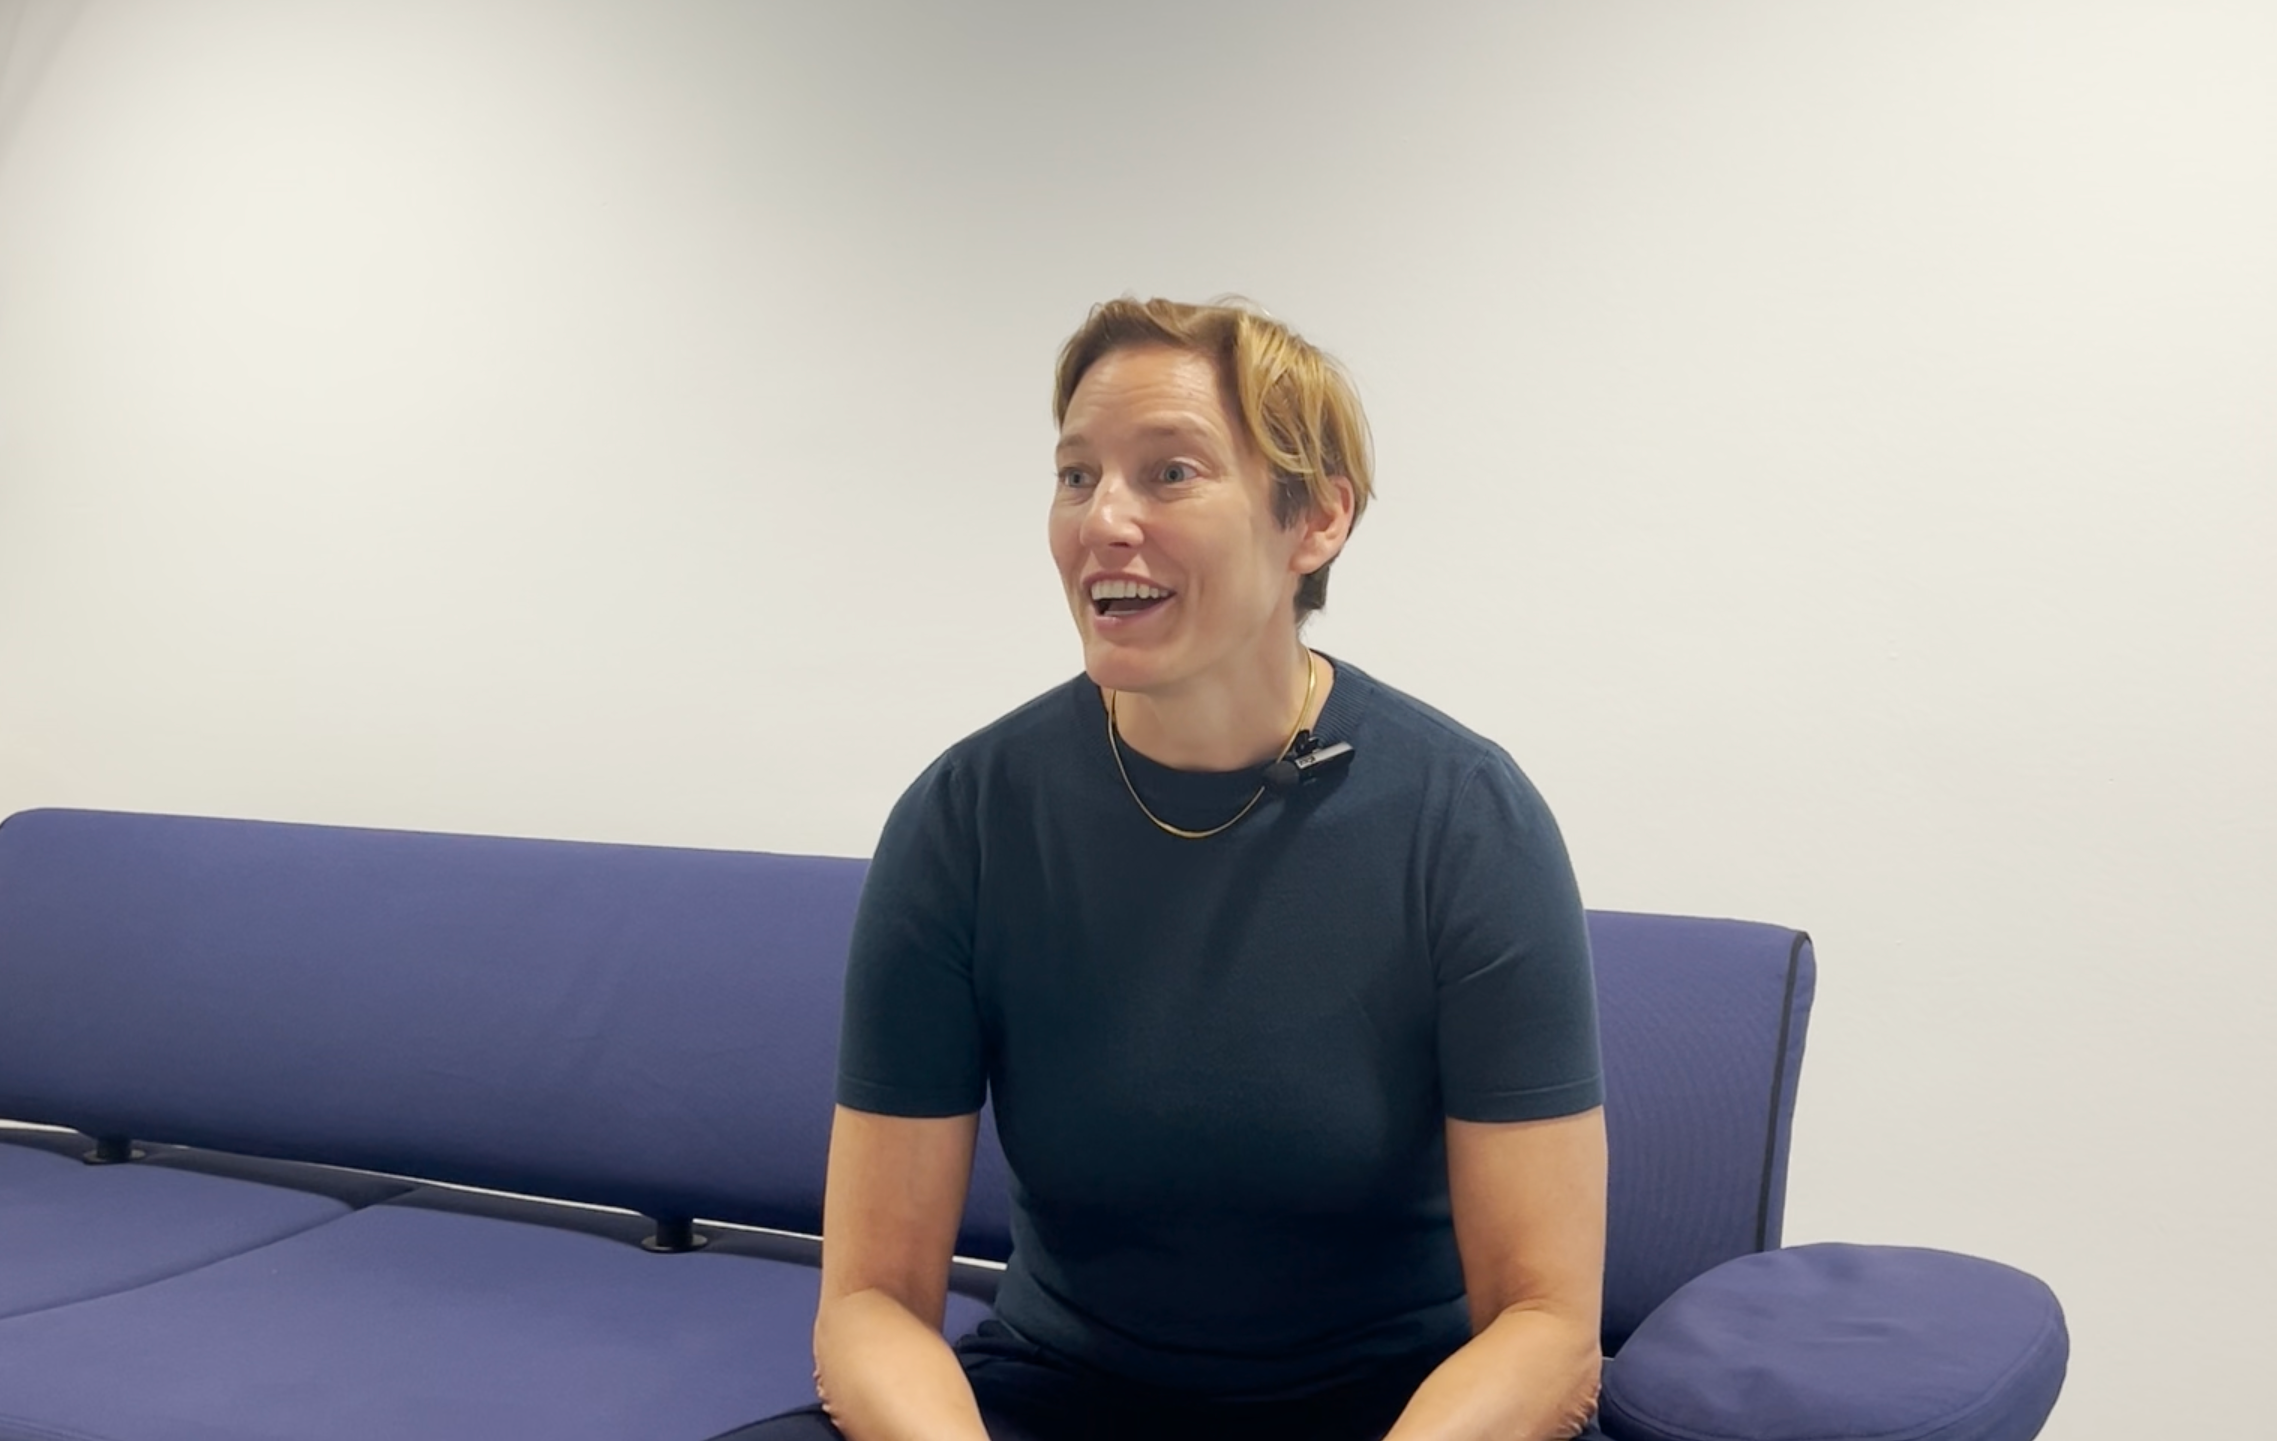 Lipidomics Advances and Females in Mass Spec: An Analytica Interview with Anne Bendt